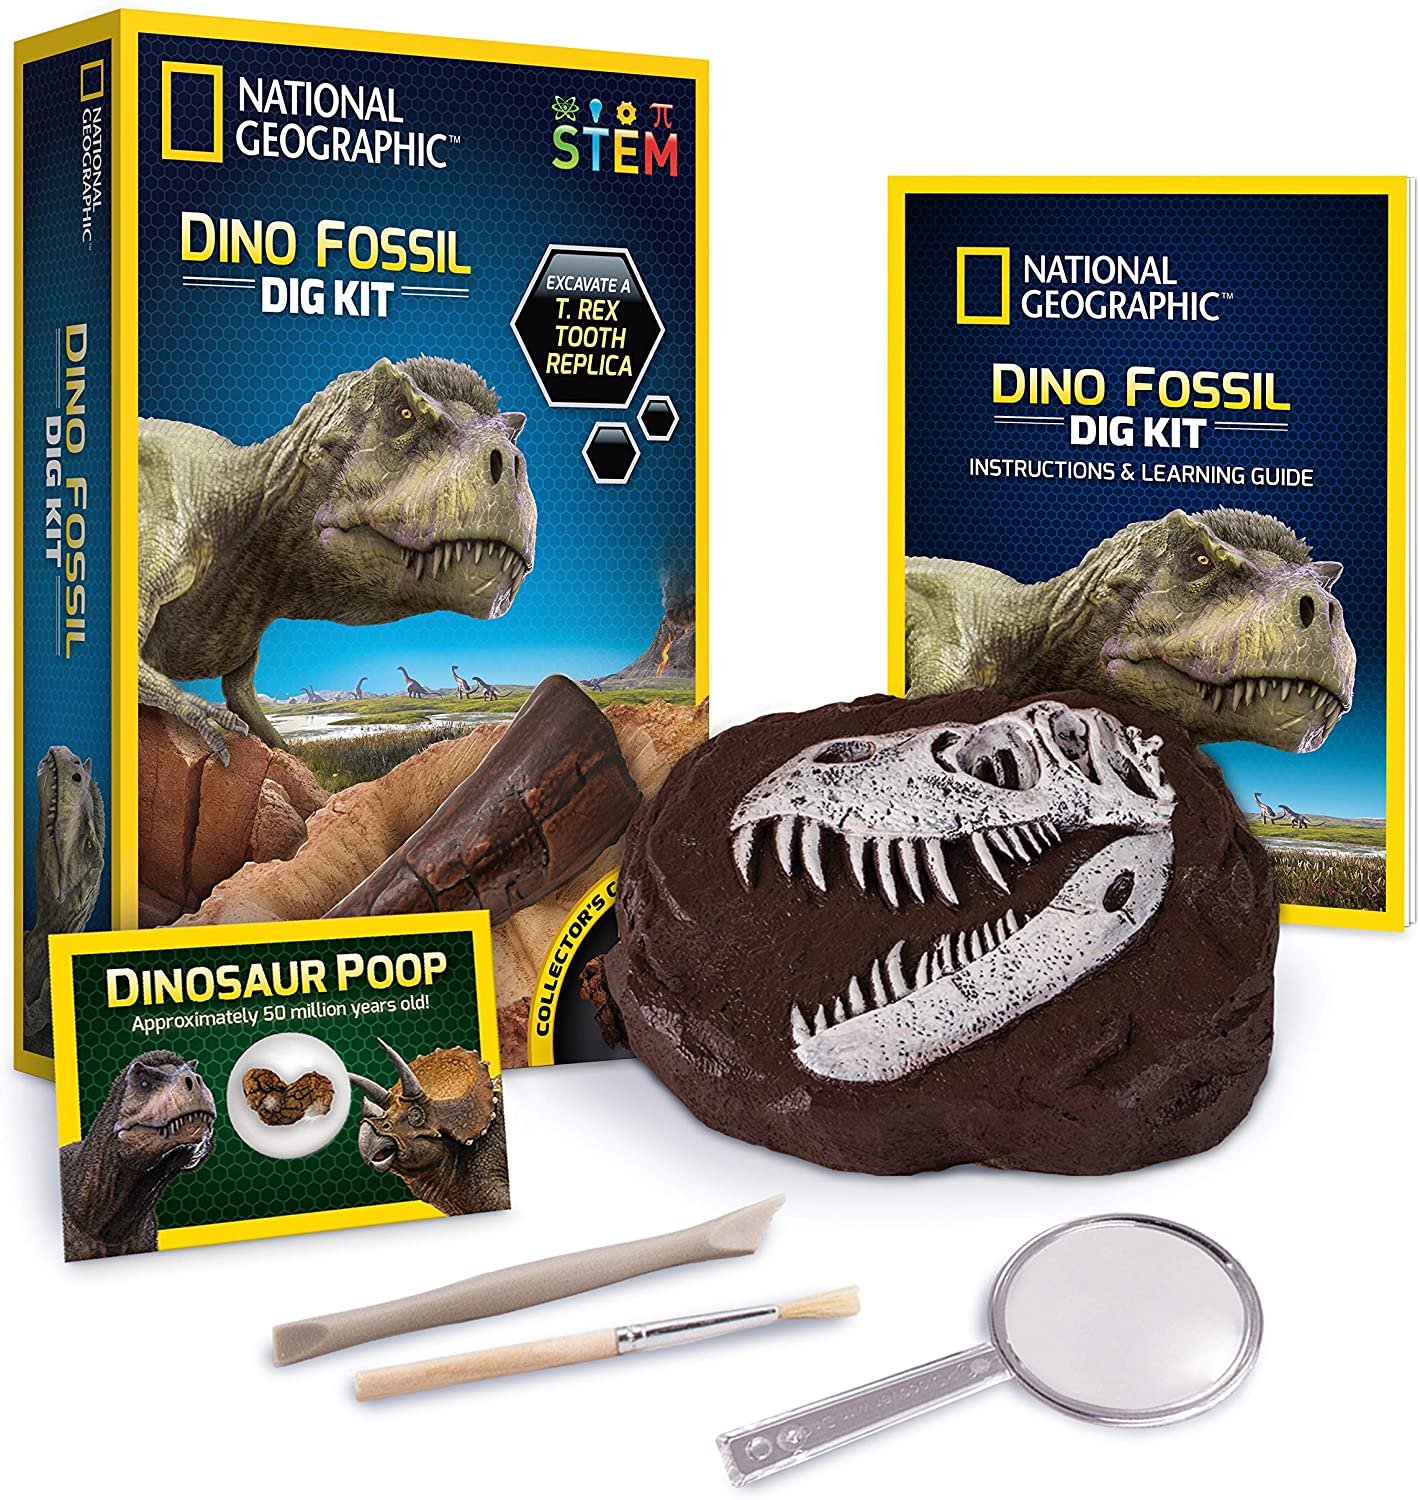 National Geographic Rocks and Minerals Education Set - 15-Piece Rock Collection Starter Kit with Tiger?s Eye, Rose Quartz, Re